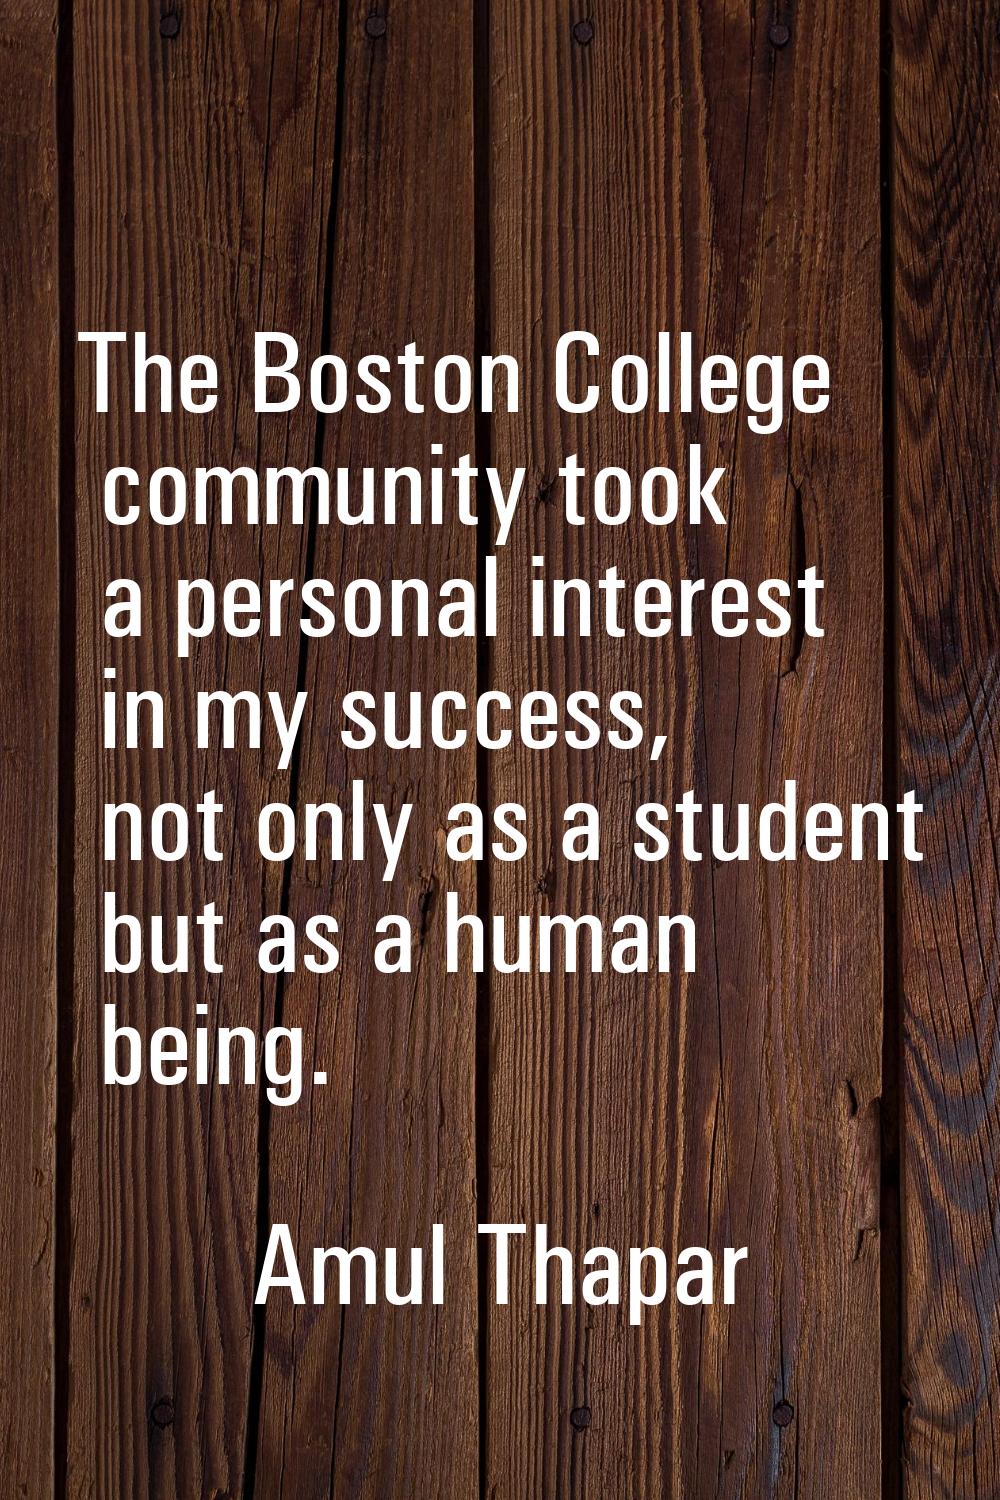 The Boston College community took a personal interest in my success, not only as a student but as a